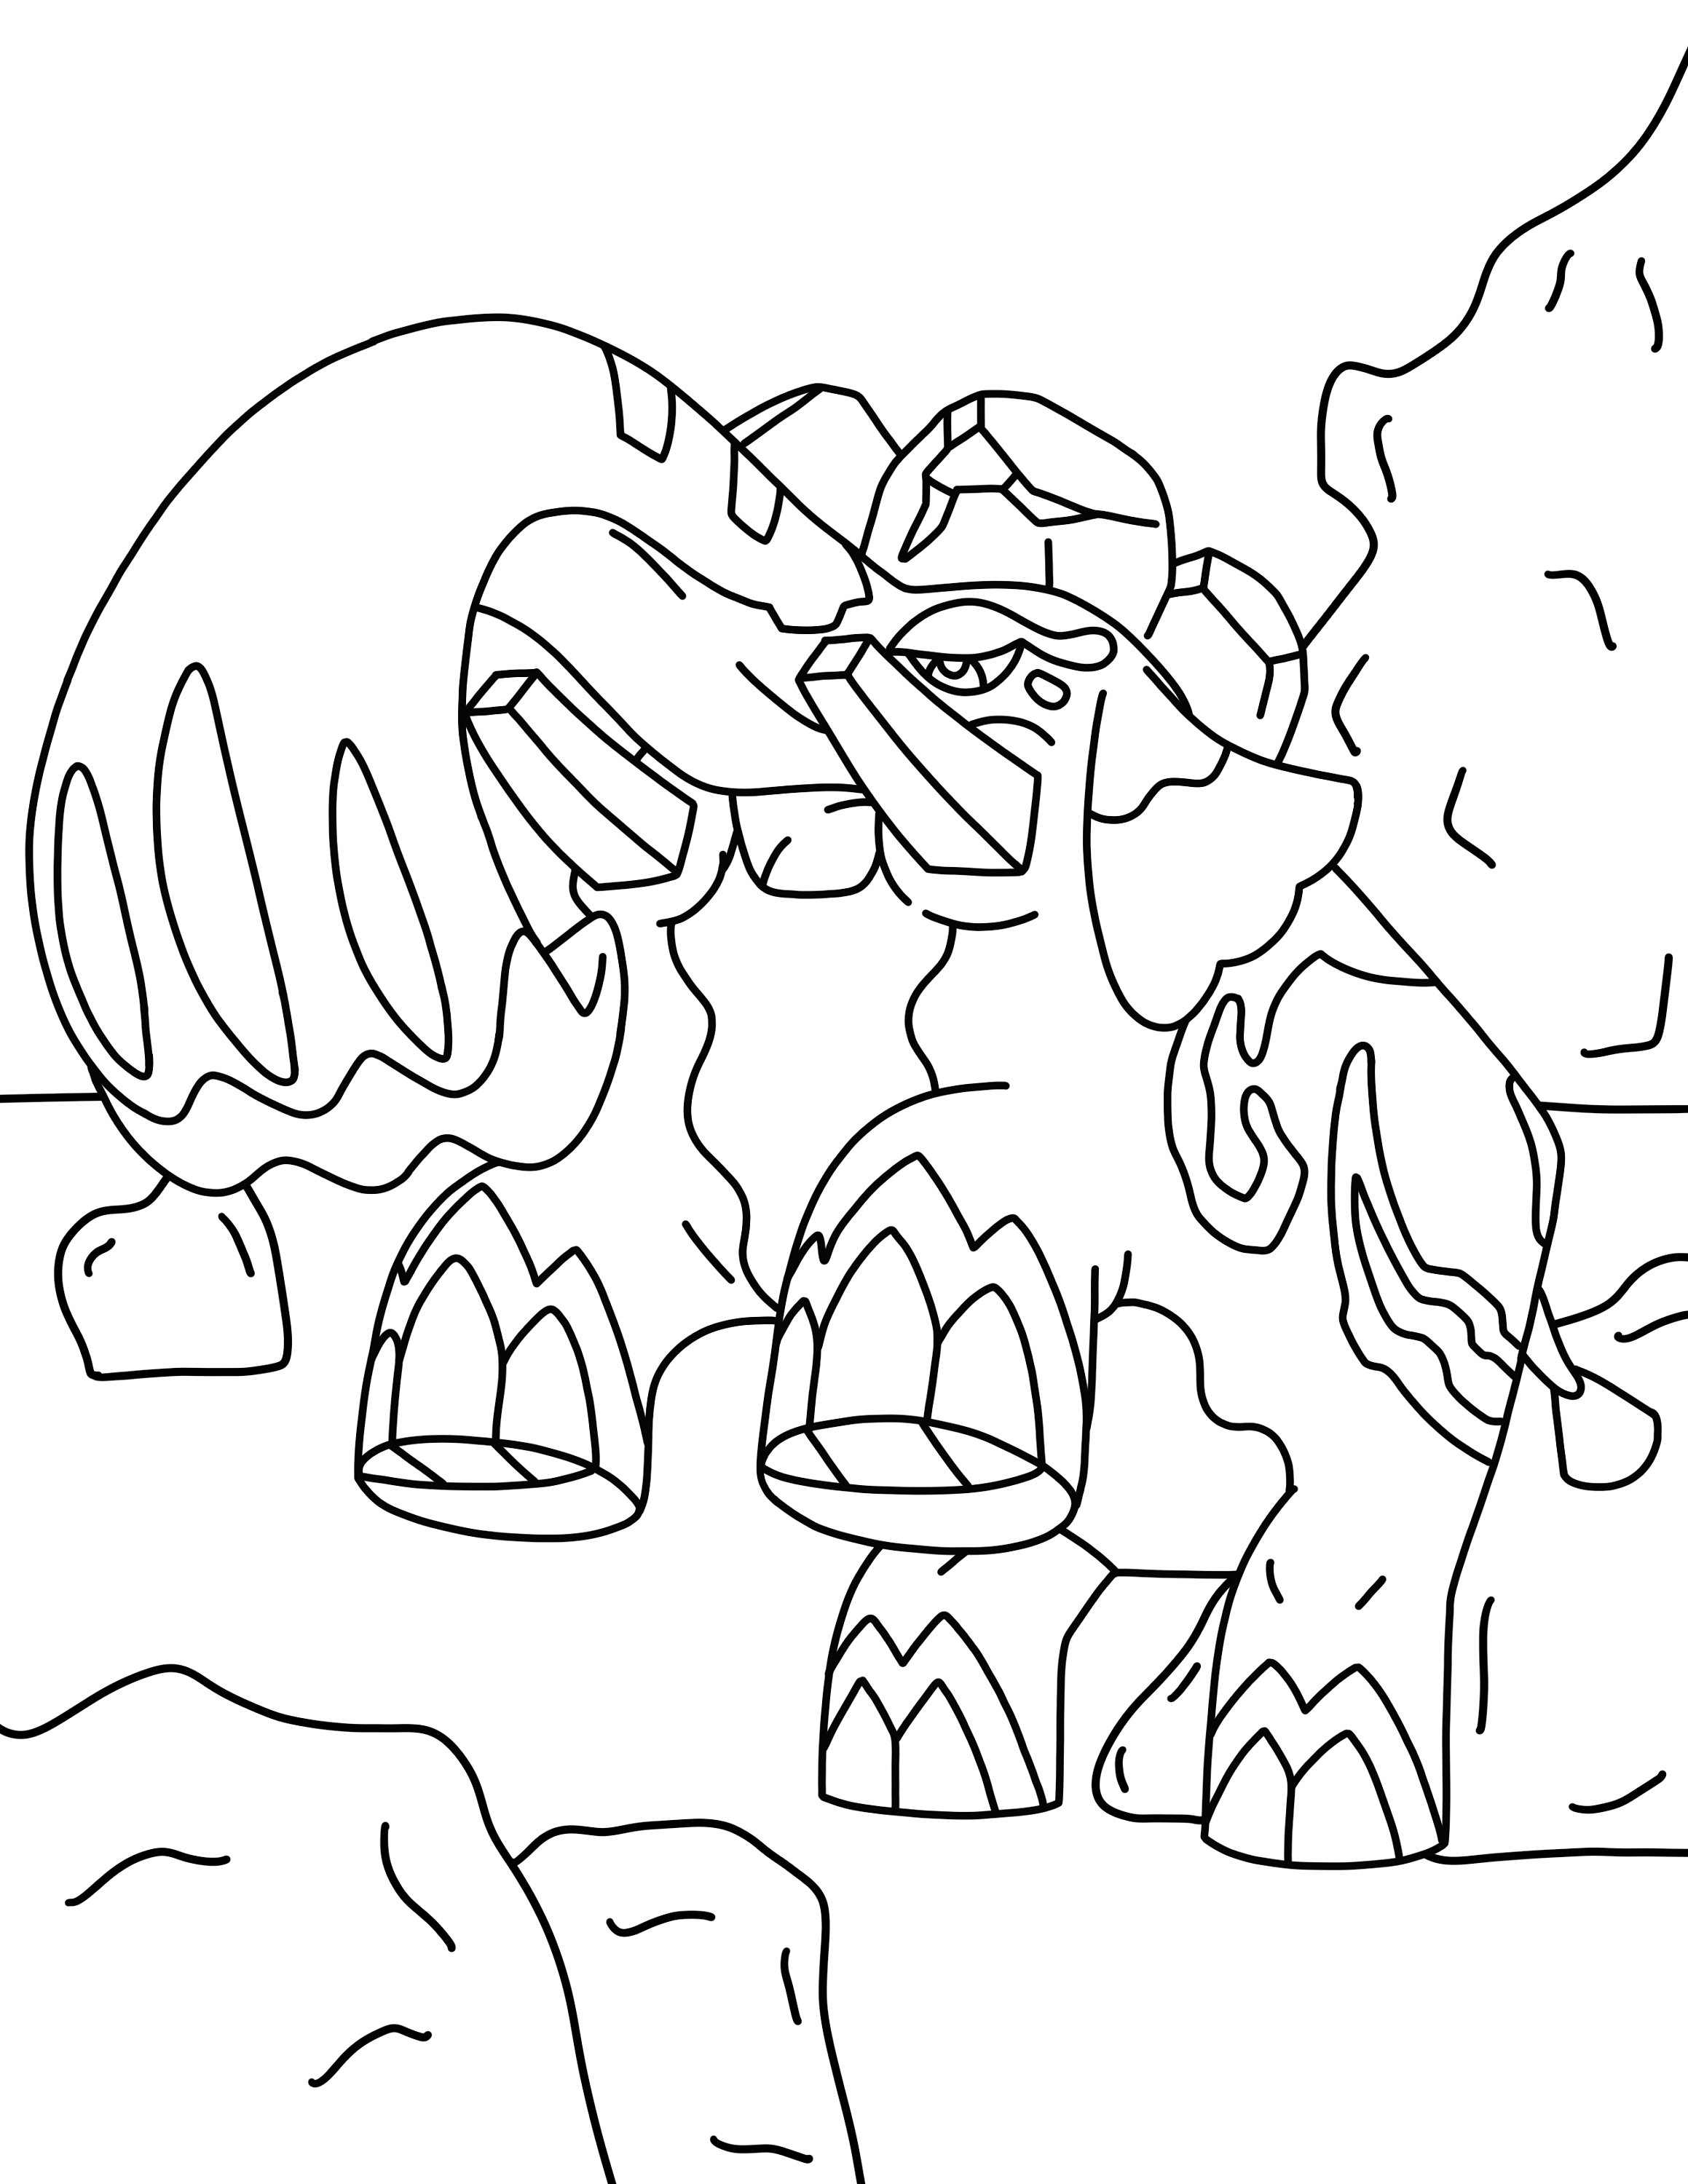 Easy pokemon coloring book drawings